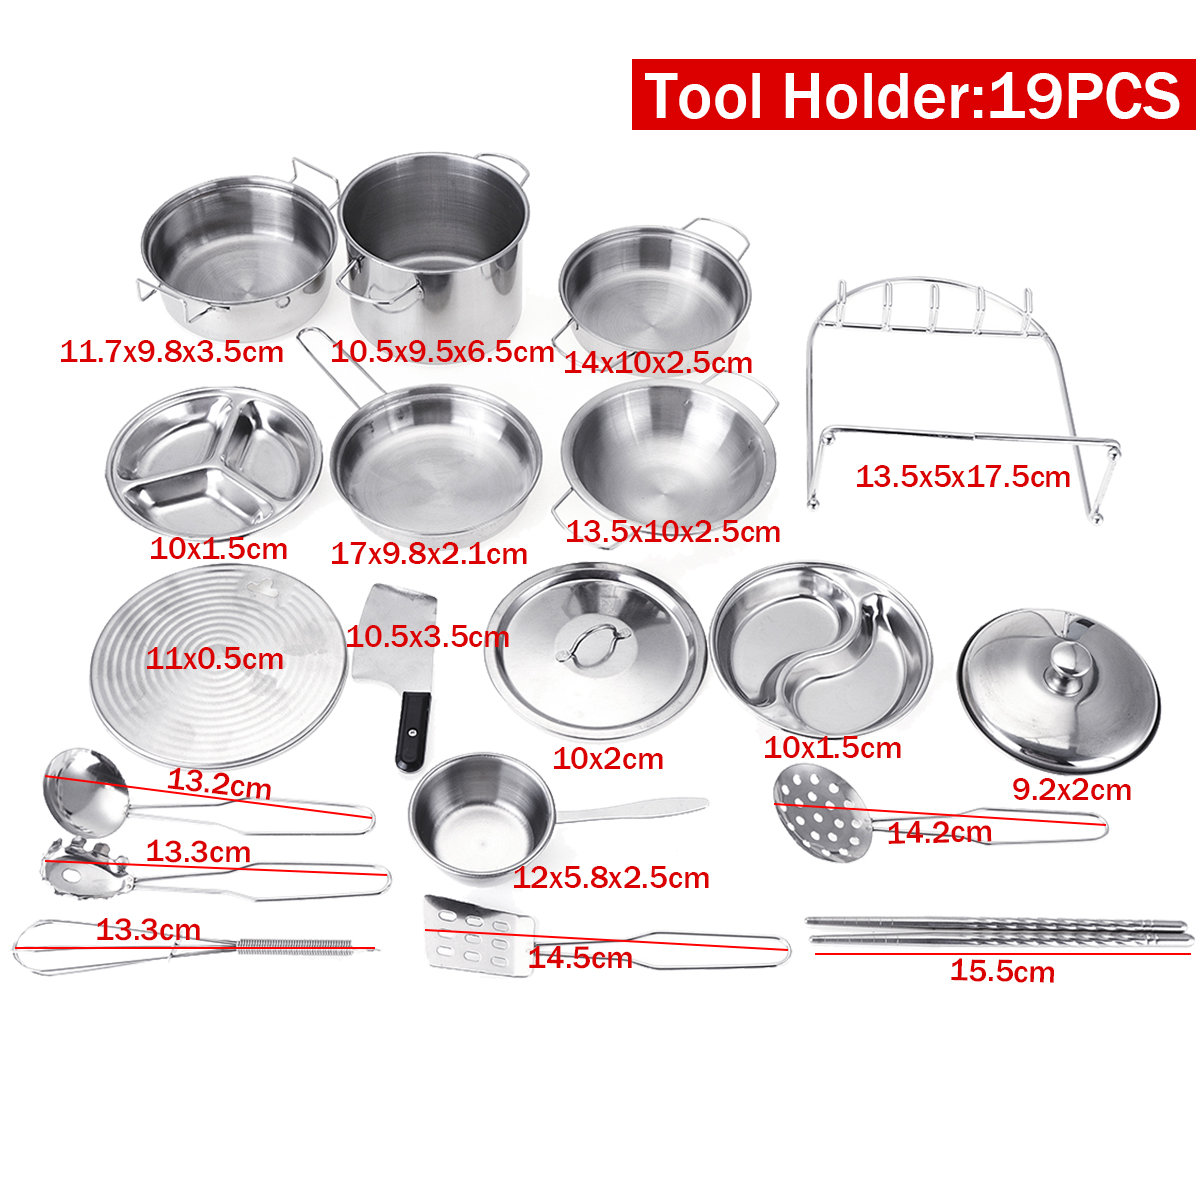 32PCS-Mini-Stainless-Steel-Kitchen-Cutlery-Play-House-Food-Toy-Boiler-Kettle-Cup-Bowl-Spoon-Cookware-1423237-4